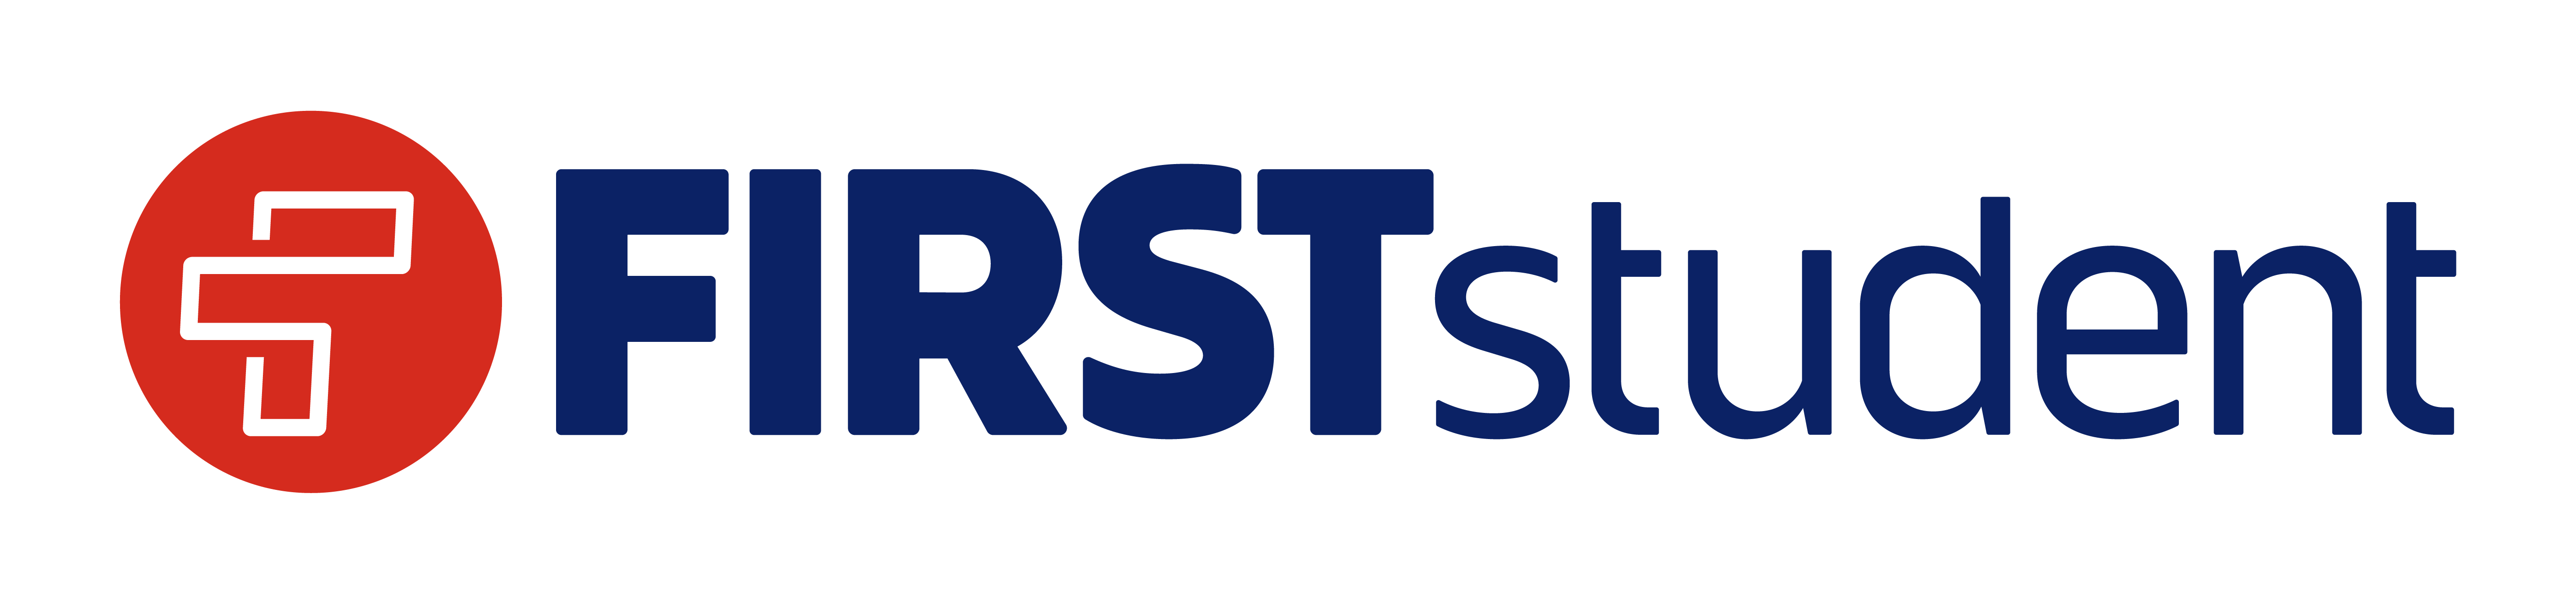 First Student Logo